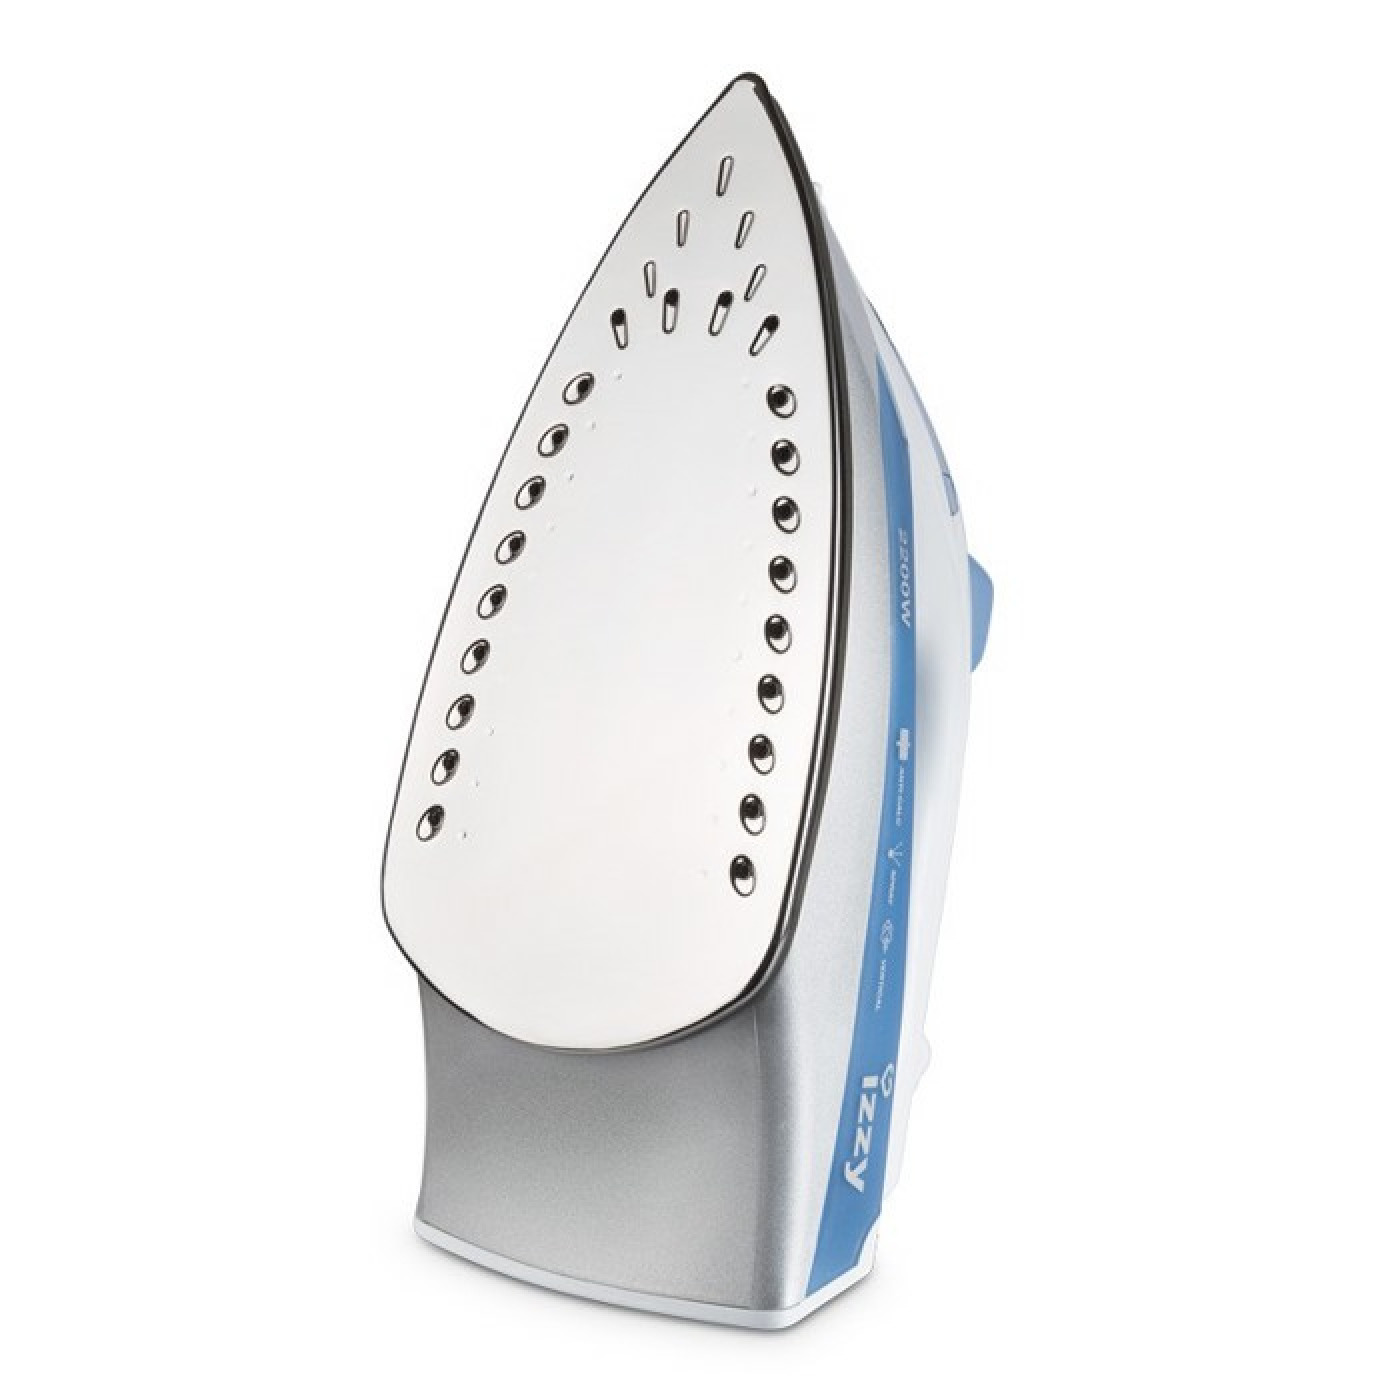 Izzy-HJ 8026*4-Used A-Steam Iron-2200 Watts